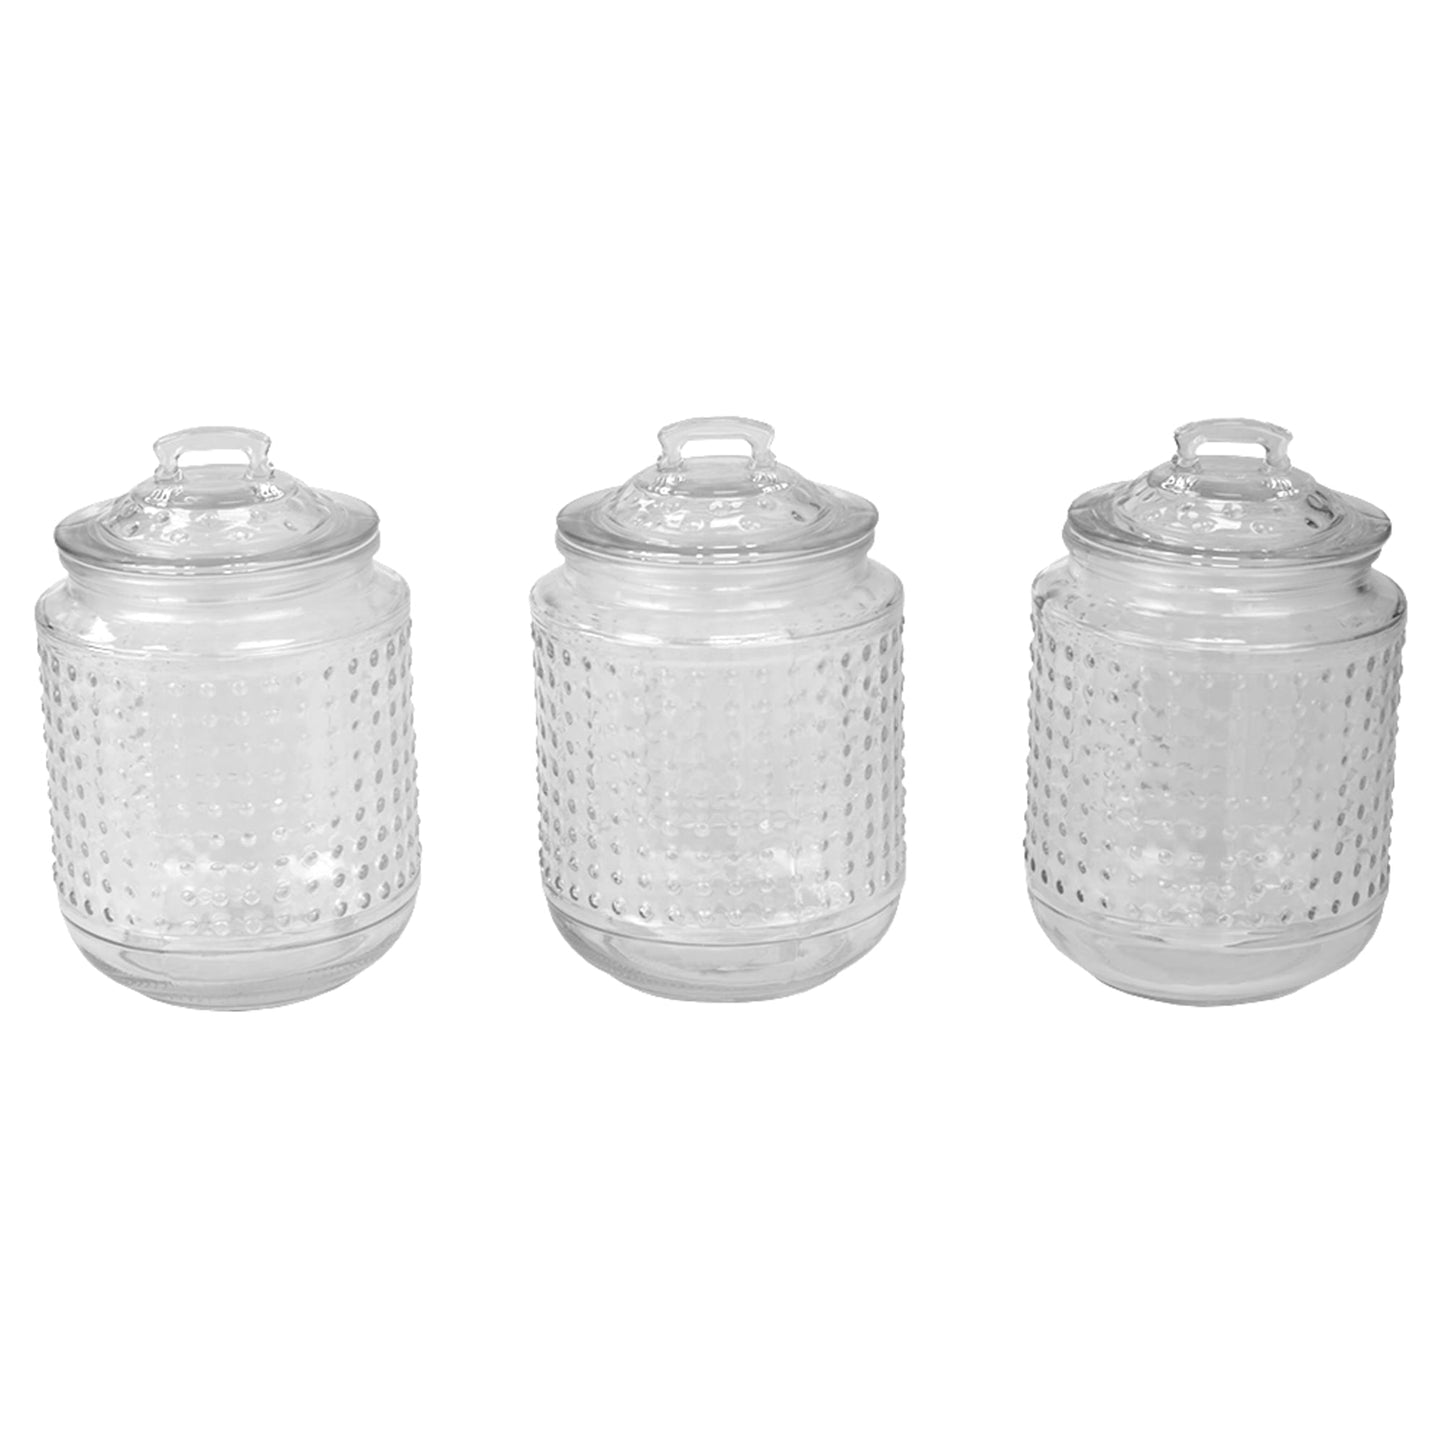 Dott 40.5 oz. Glass Canister, (Set of 3), Clear